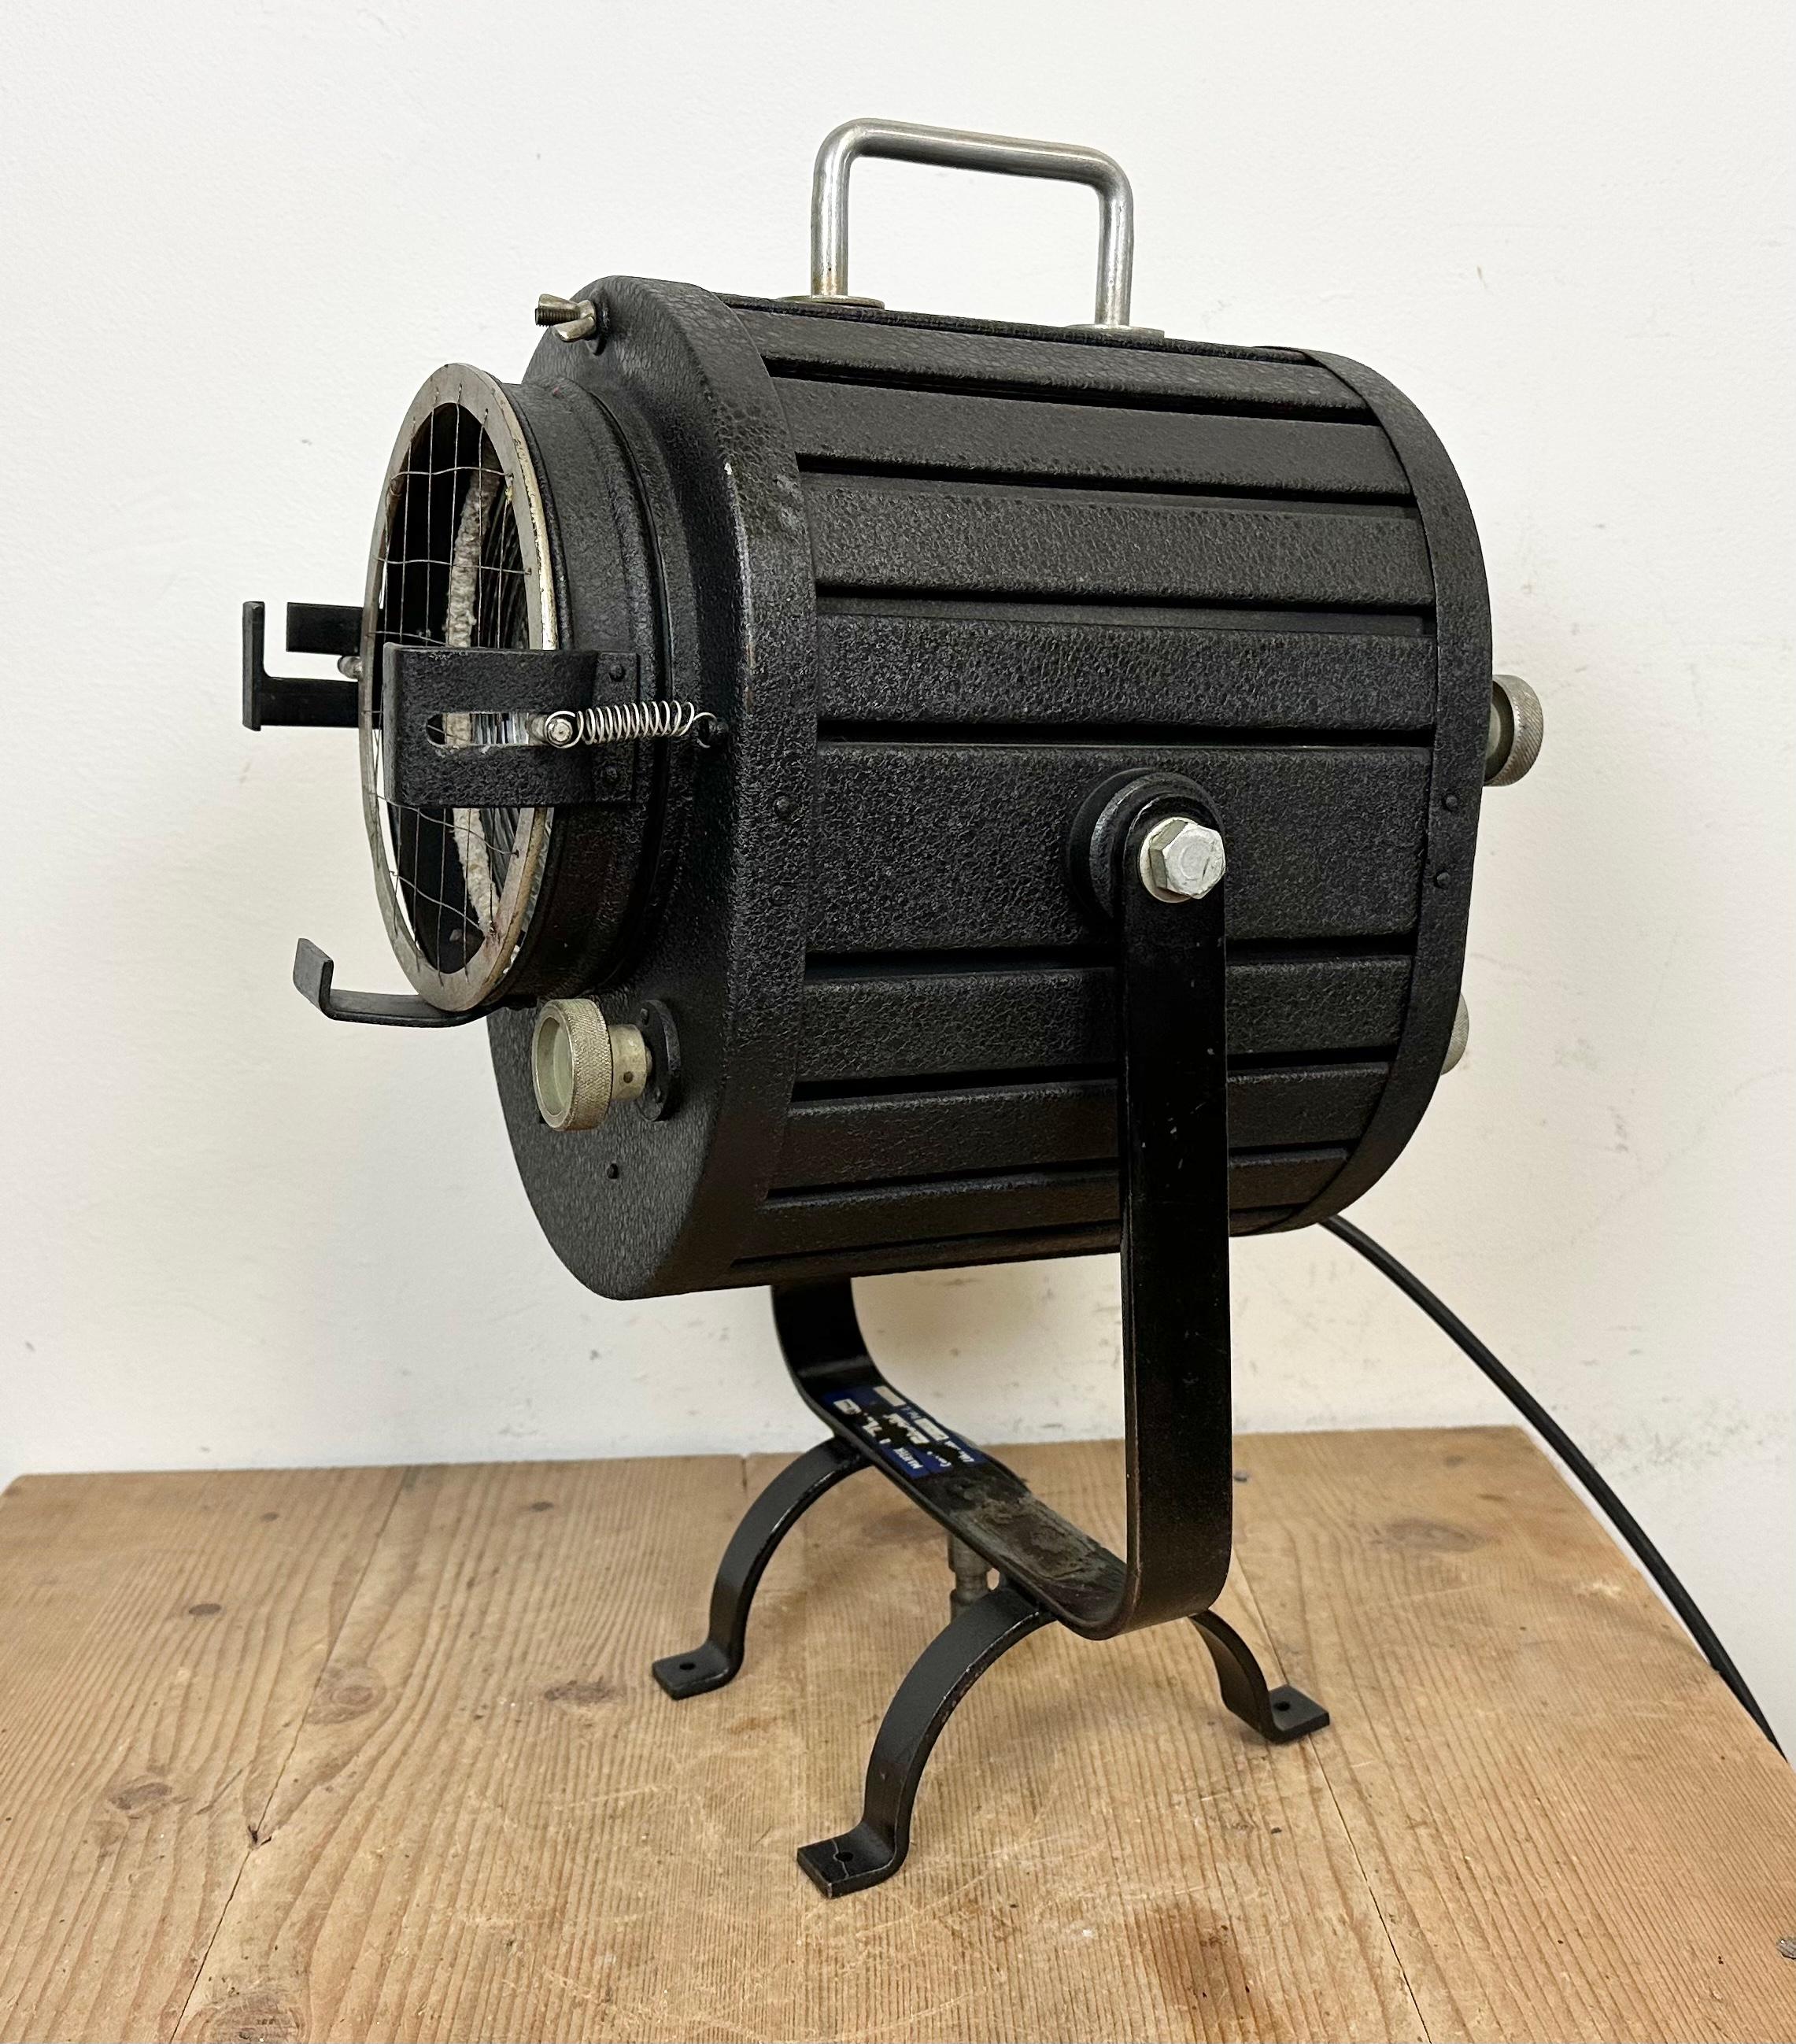 - Vintage theatre spotlight table lamp made in former Czechoslovakia during the 1960s 
- It features a black metal body and a glass lens cover
- Adjustable angle
- The porcelain socket requires E27/ E26 lightbulbs 
- New wire
- The weight of the